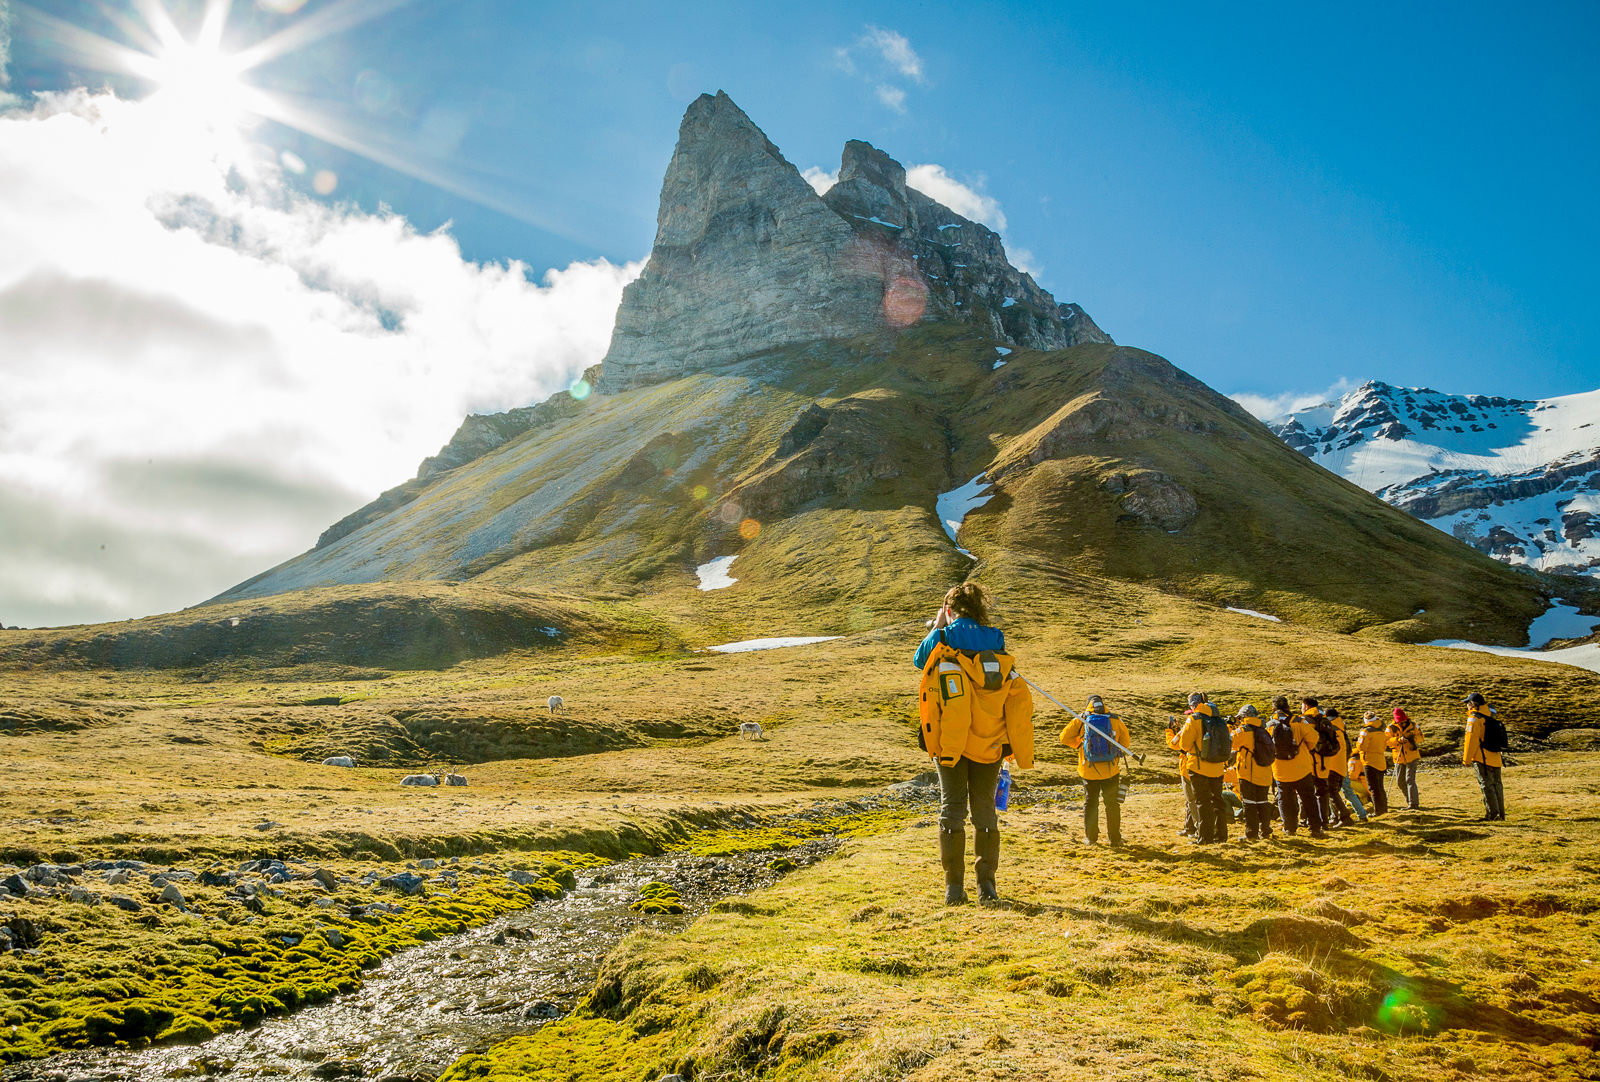 Guests of Quark Expeditions' Ultramarine trekking on a sunny day in the Arctic